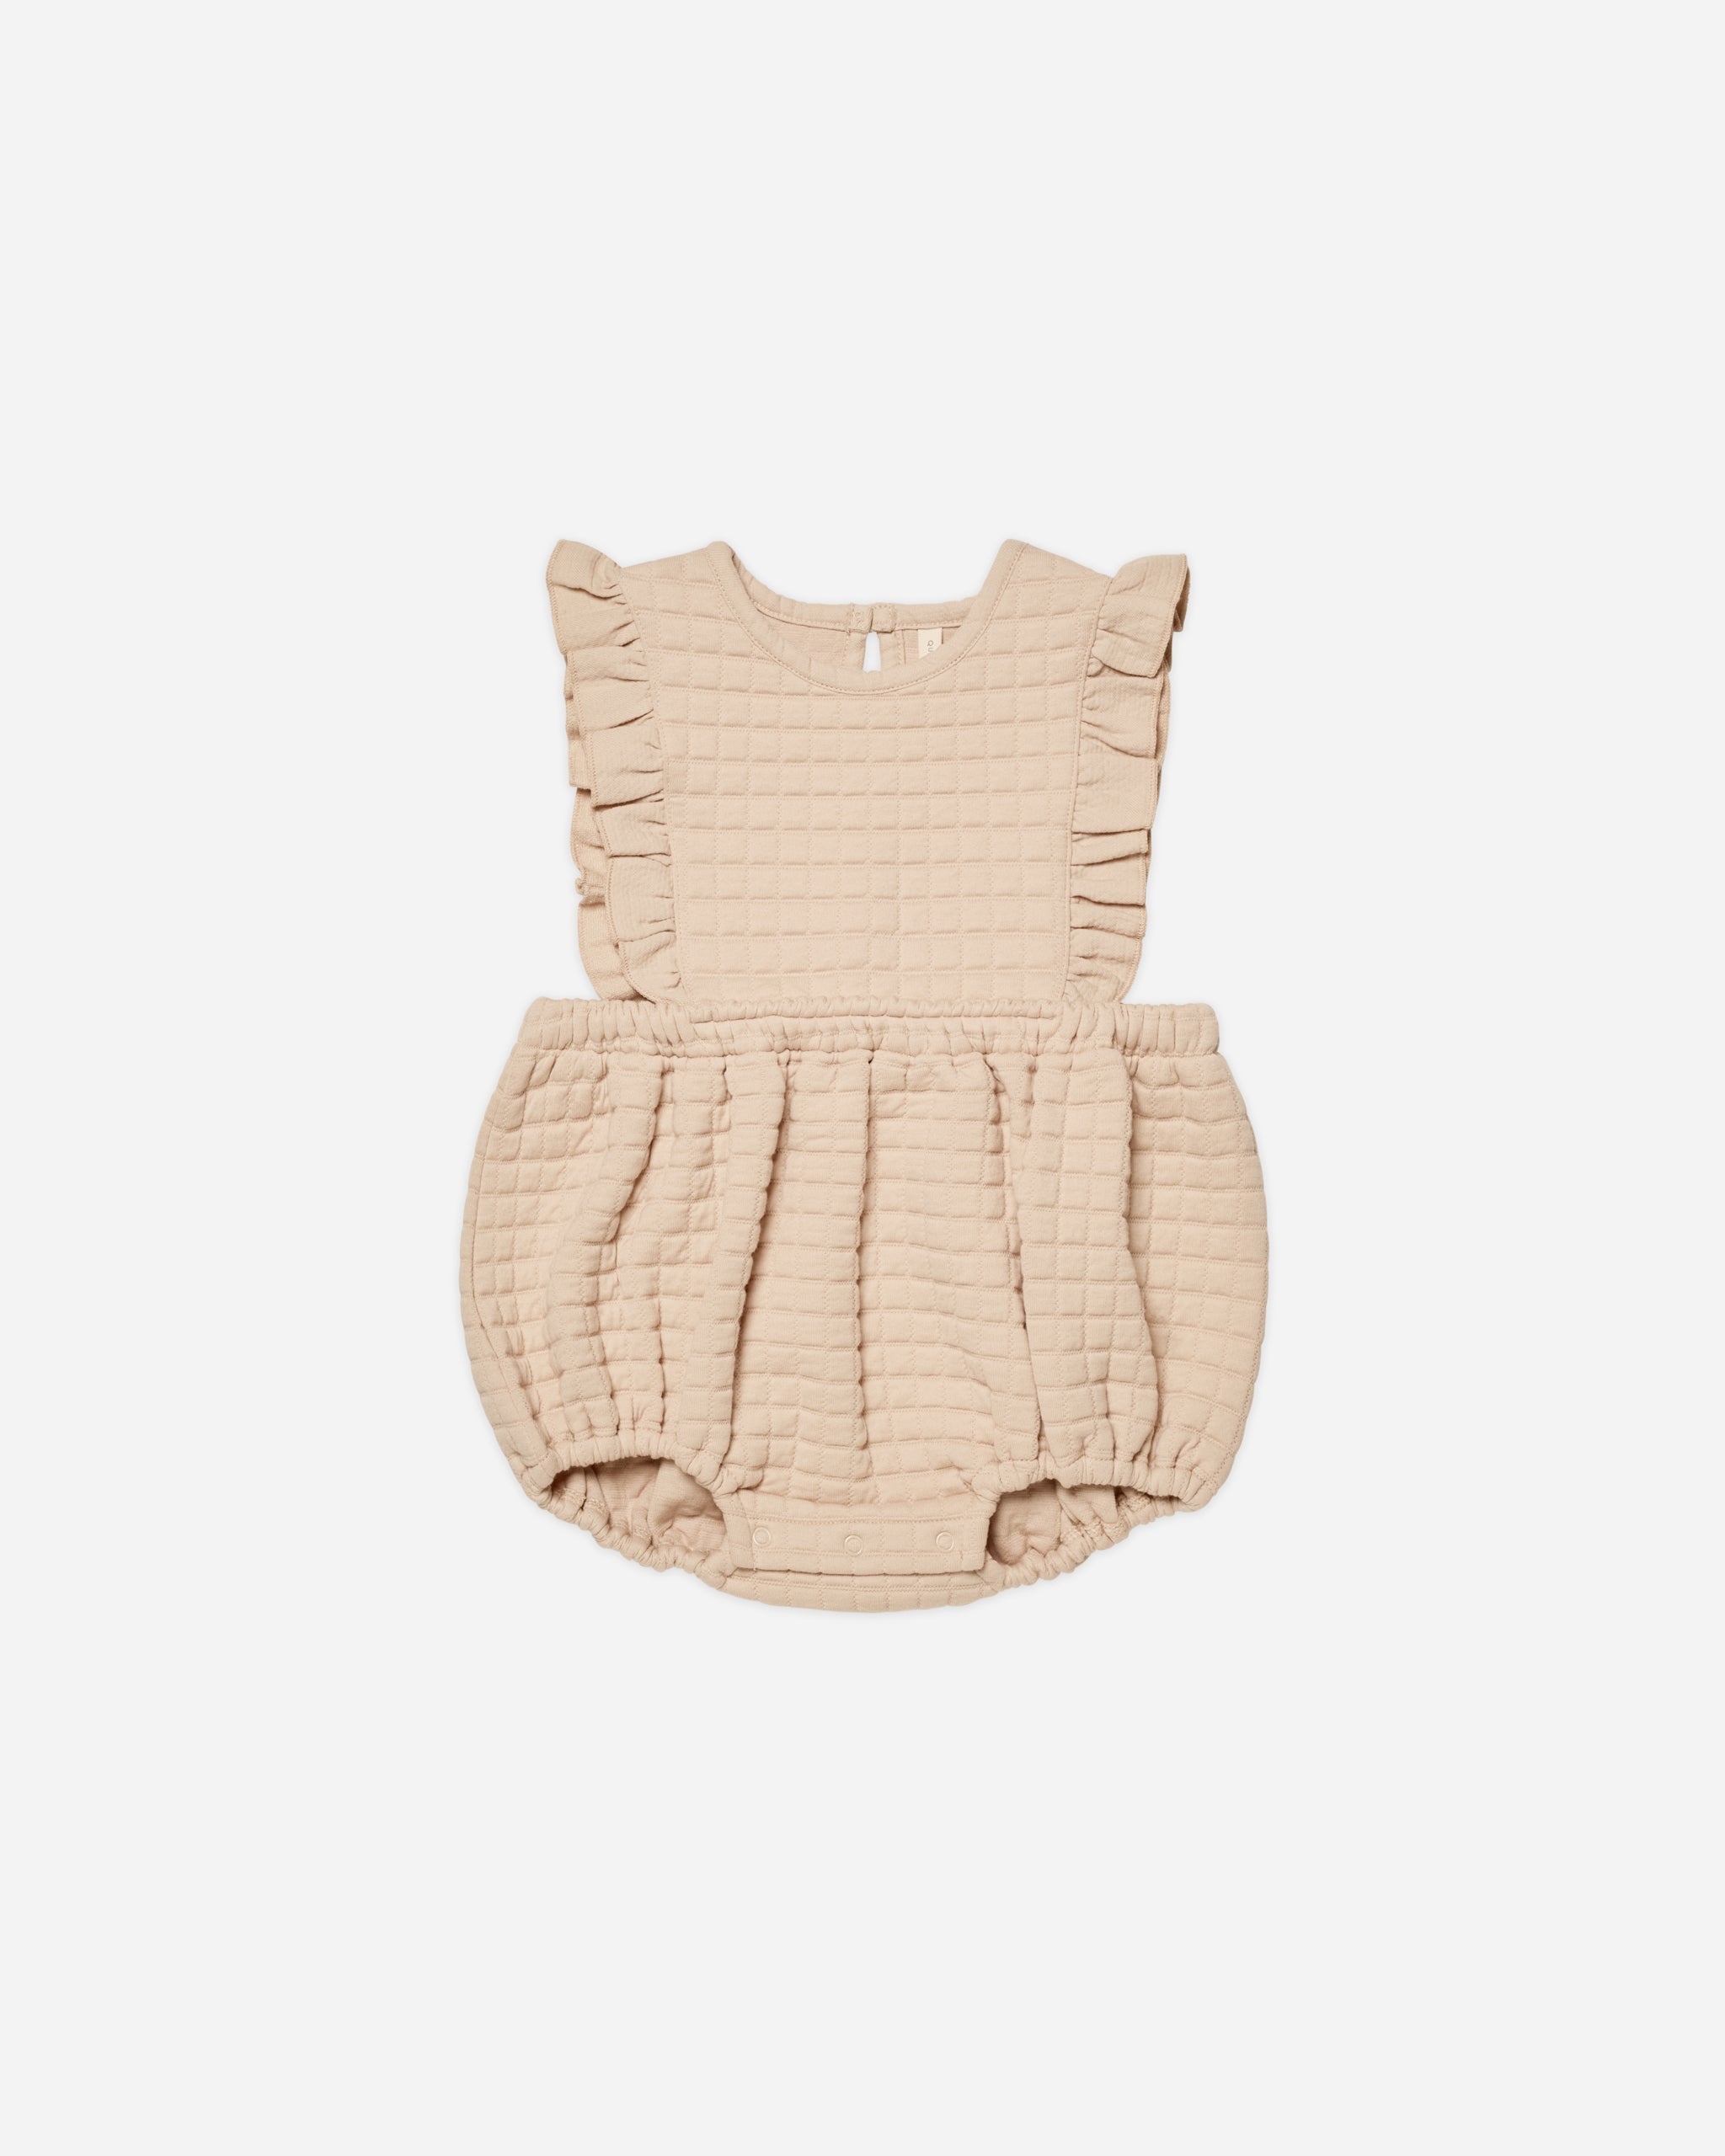 Ruffle Bubble Romper || Shell - Rylee + Cru | Kids Clothes | Trendy Baby Clothes | Modern Infant Outfits |